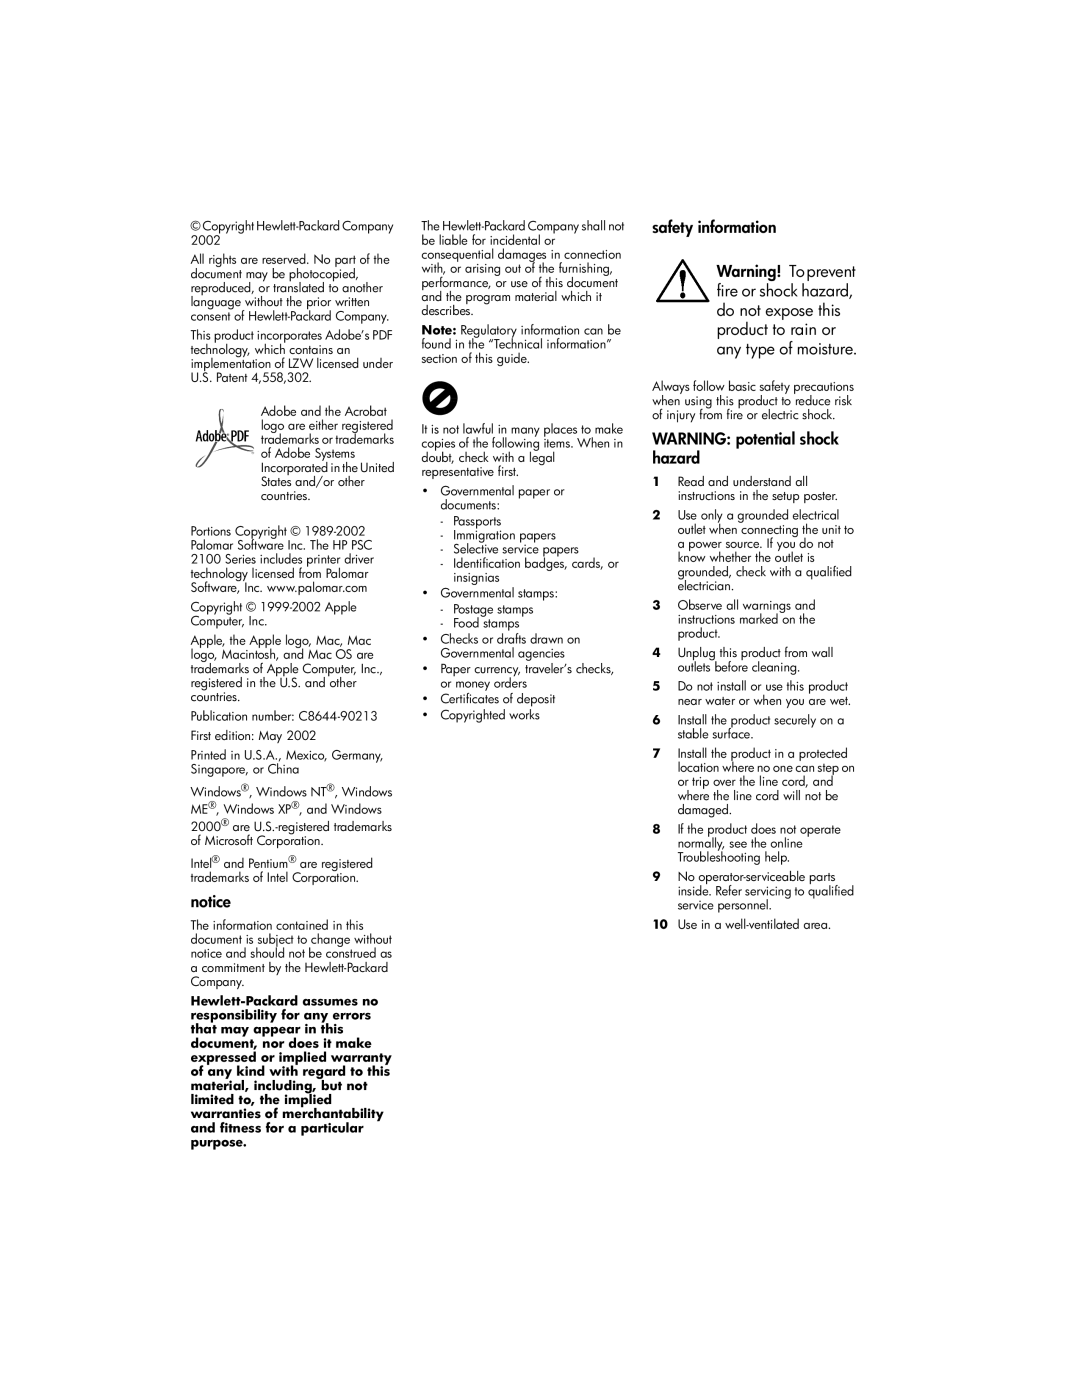 HP 2100 manual Safety information, Copyright Hewlett-Packard Company 